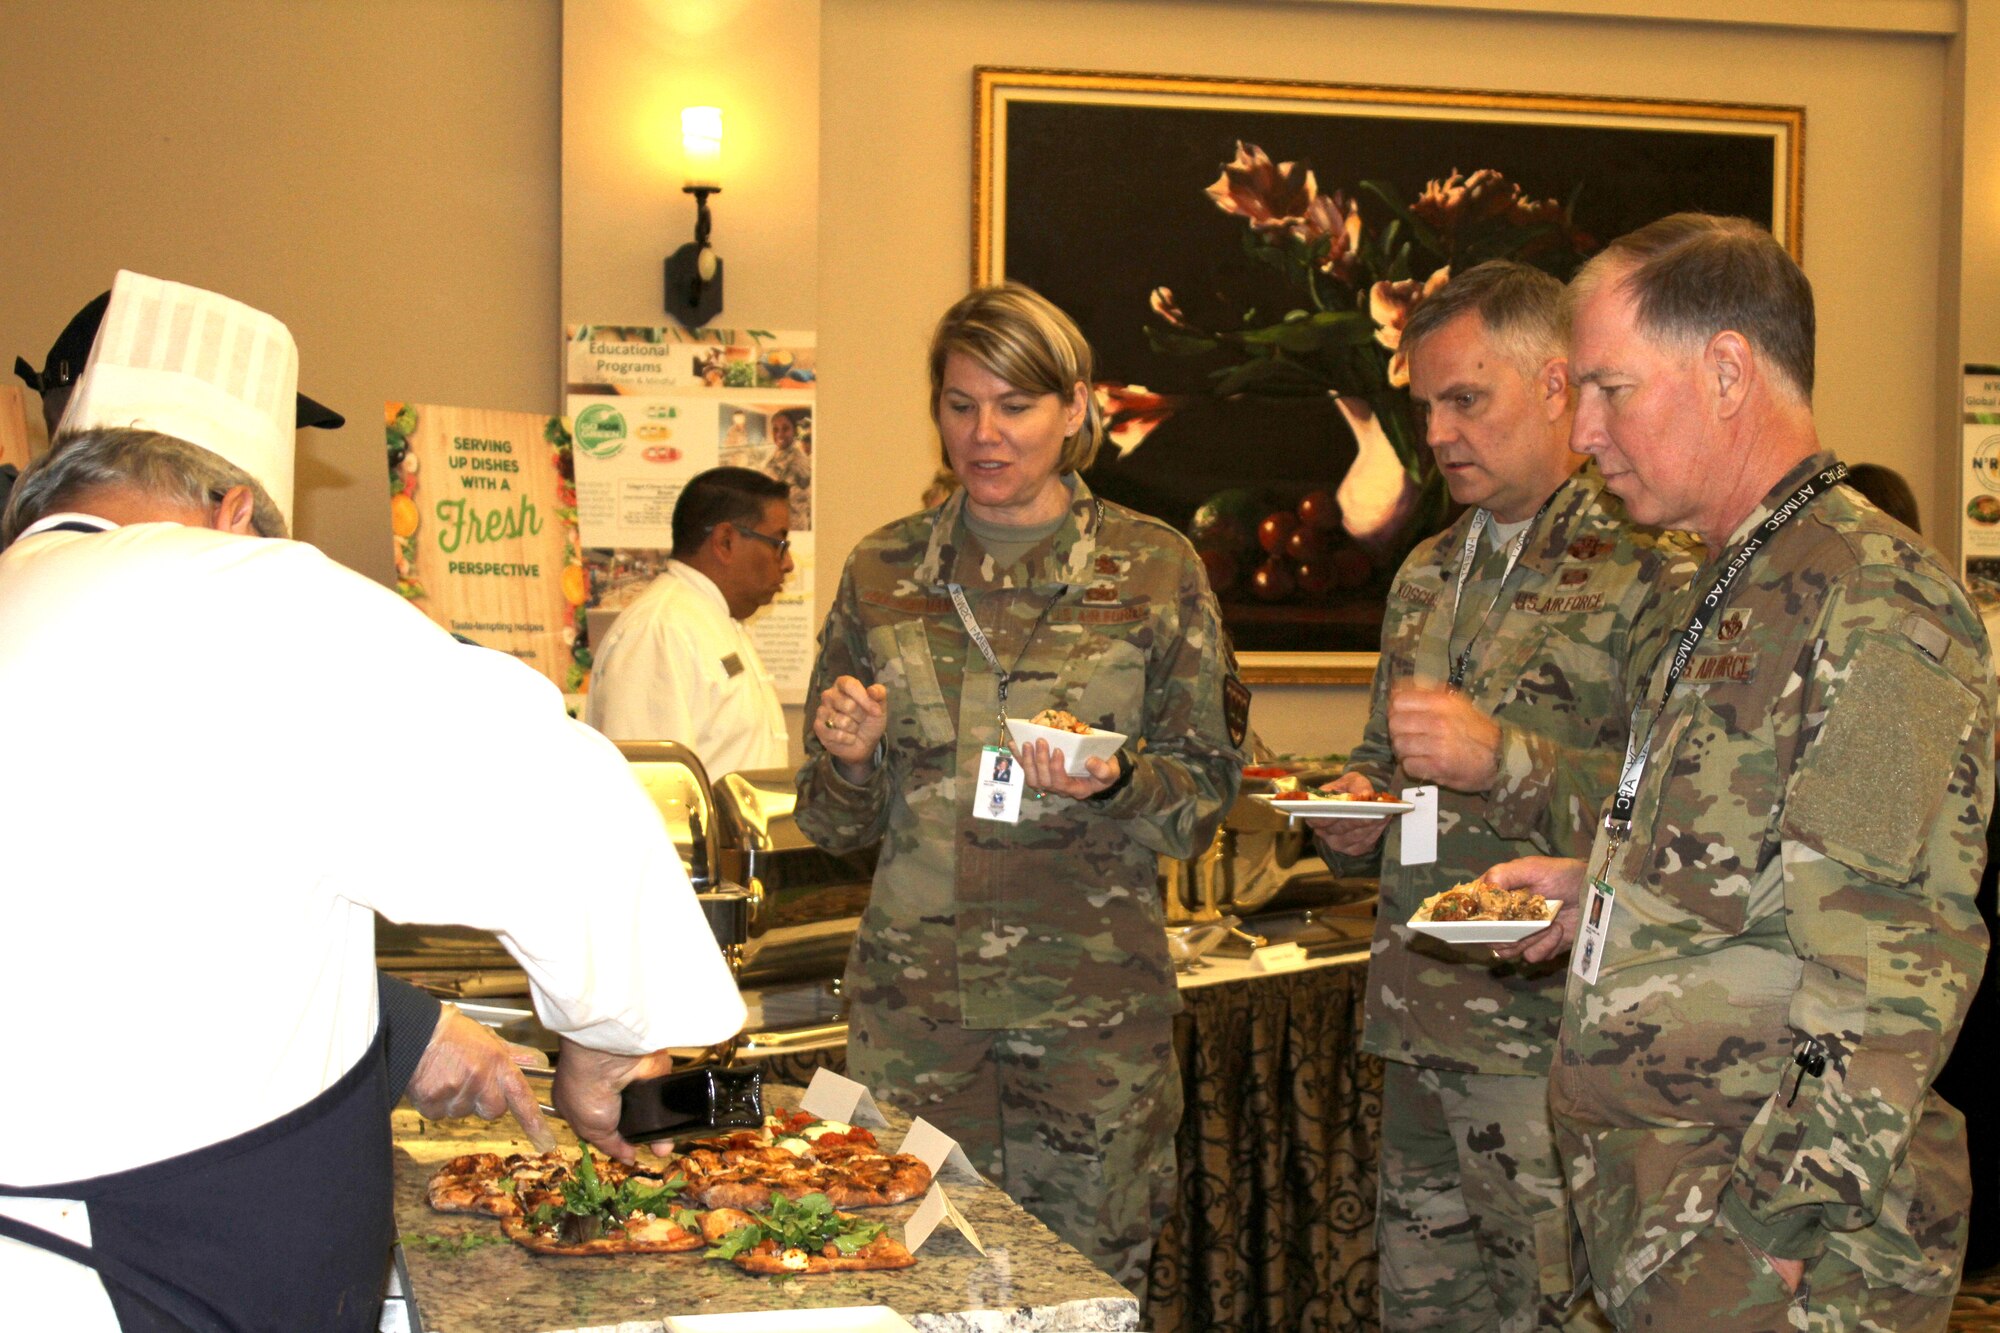 Attendees at the General Officer and Senior Executive Service Summit wait to be served fresh barbecue chik-n-less chicken pizza during lunch April 10, 2019, at Joint Base San Antonio-Lackland. AFSVA prepared various healthy and nutritious food items to familiarize summit attendees with Healthy Food Initiative, a dining concept being rolled out across the Air Force that’s designed to deliver fresh, healthy, nutritious and tasty food to Airmen. (U.S. Air Force photo by Debbie Aragon)